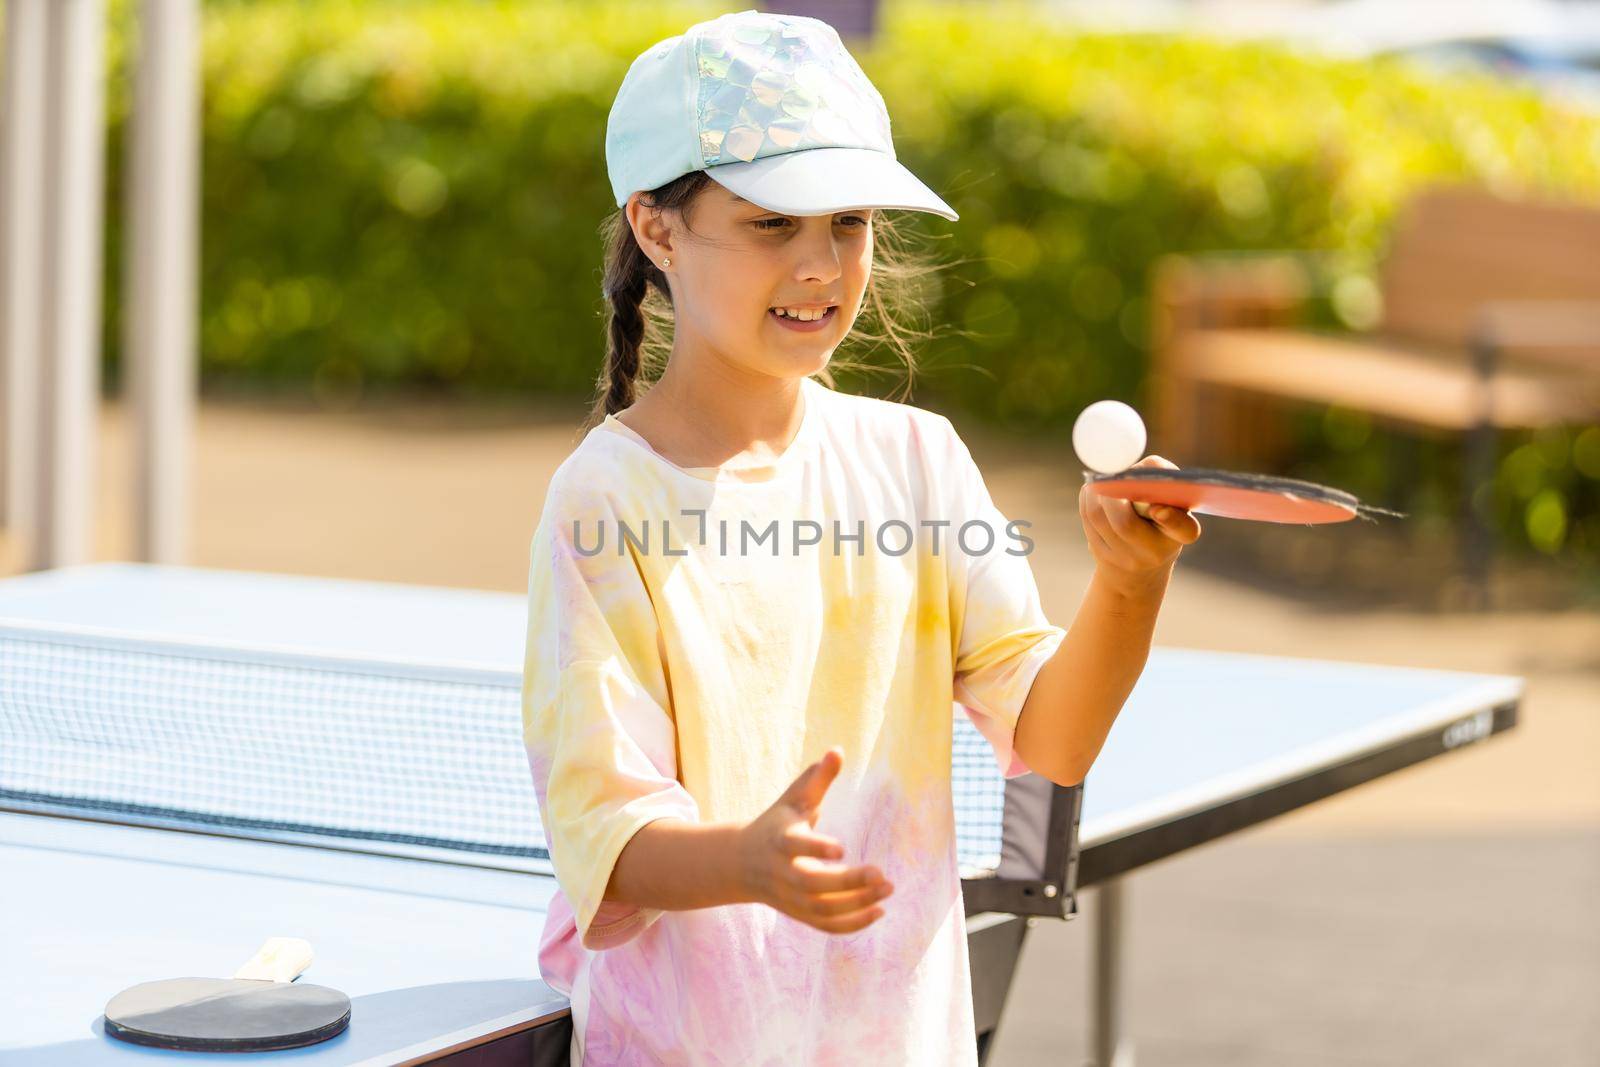 Young teenager girl playing ping pong. She holds a ball and a racket in her hands. Playing table tennis outdoors in the yard. by Andelov13